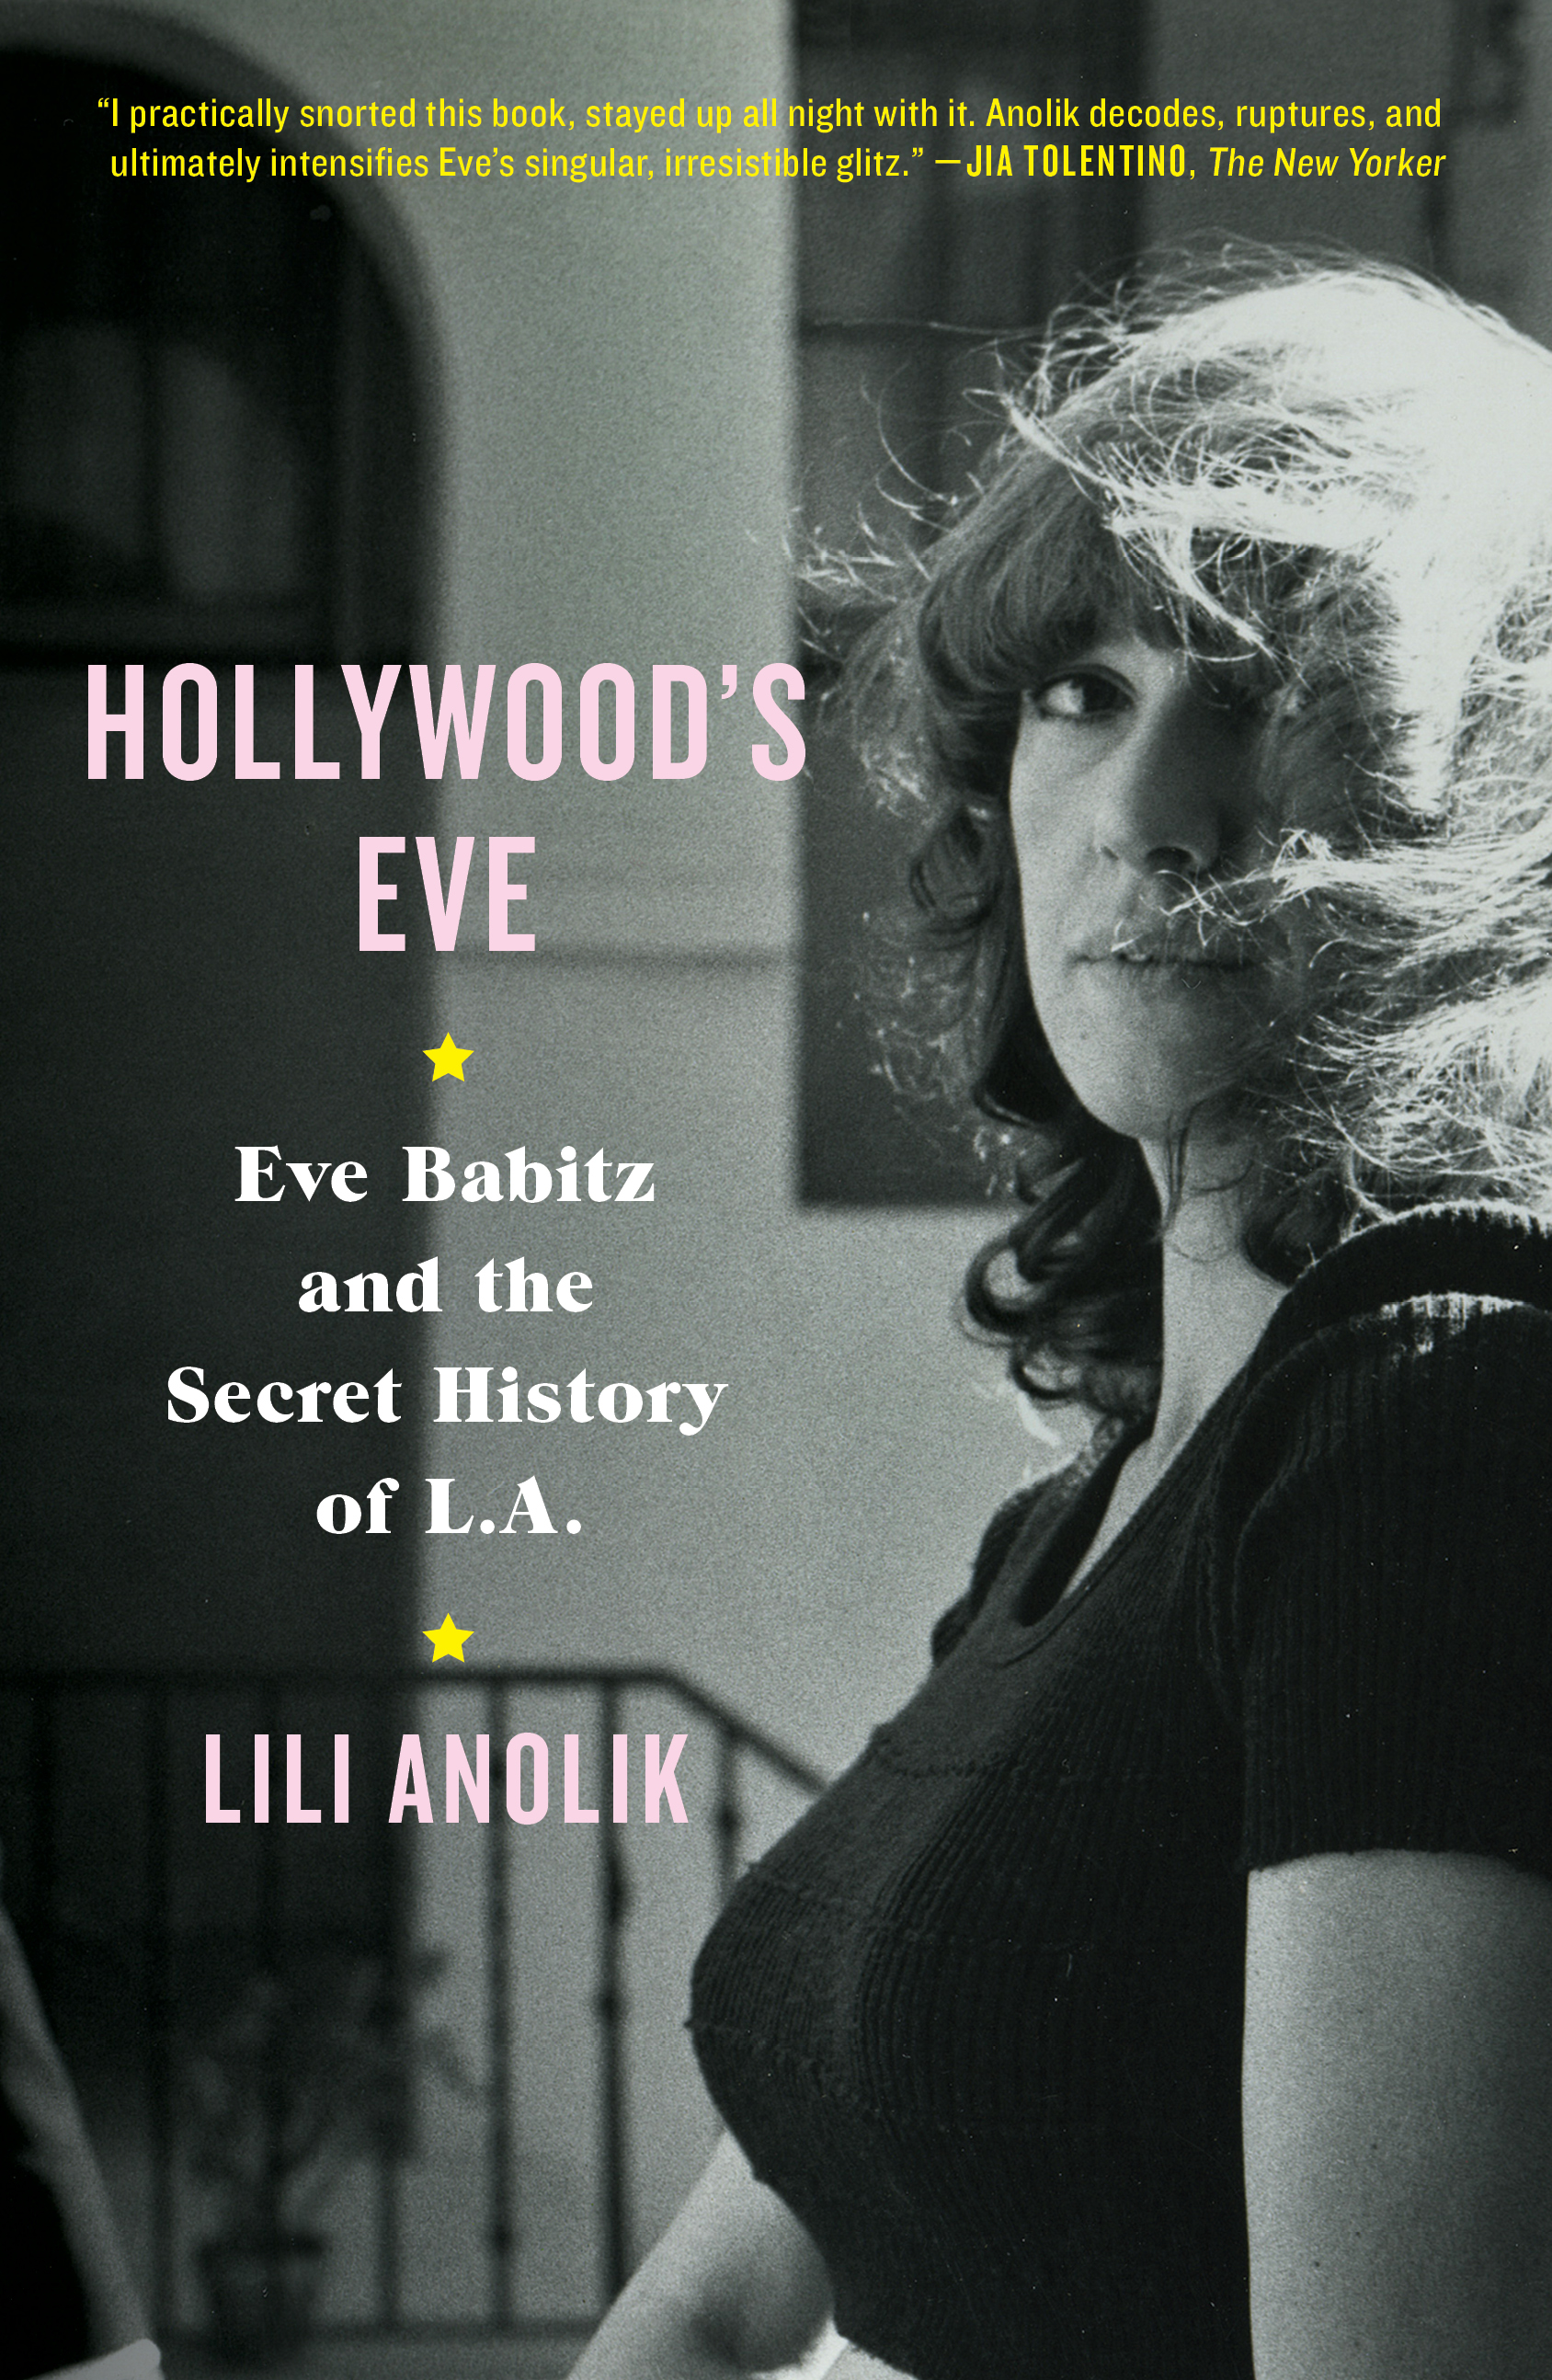 HOLLYWOOD’S EVE: Eve Babitz and the Secret History of L.A.